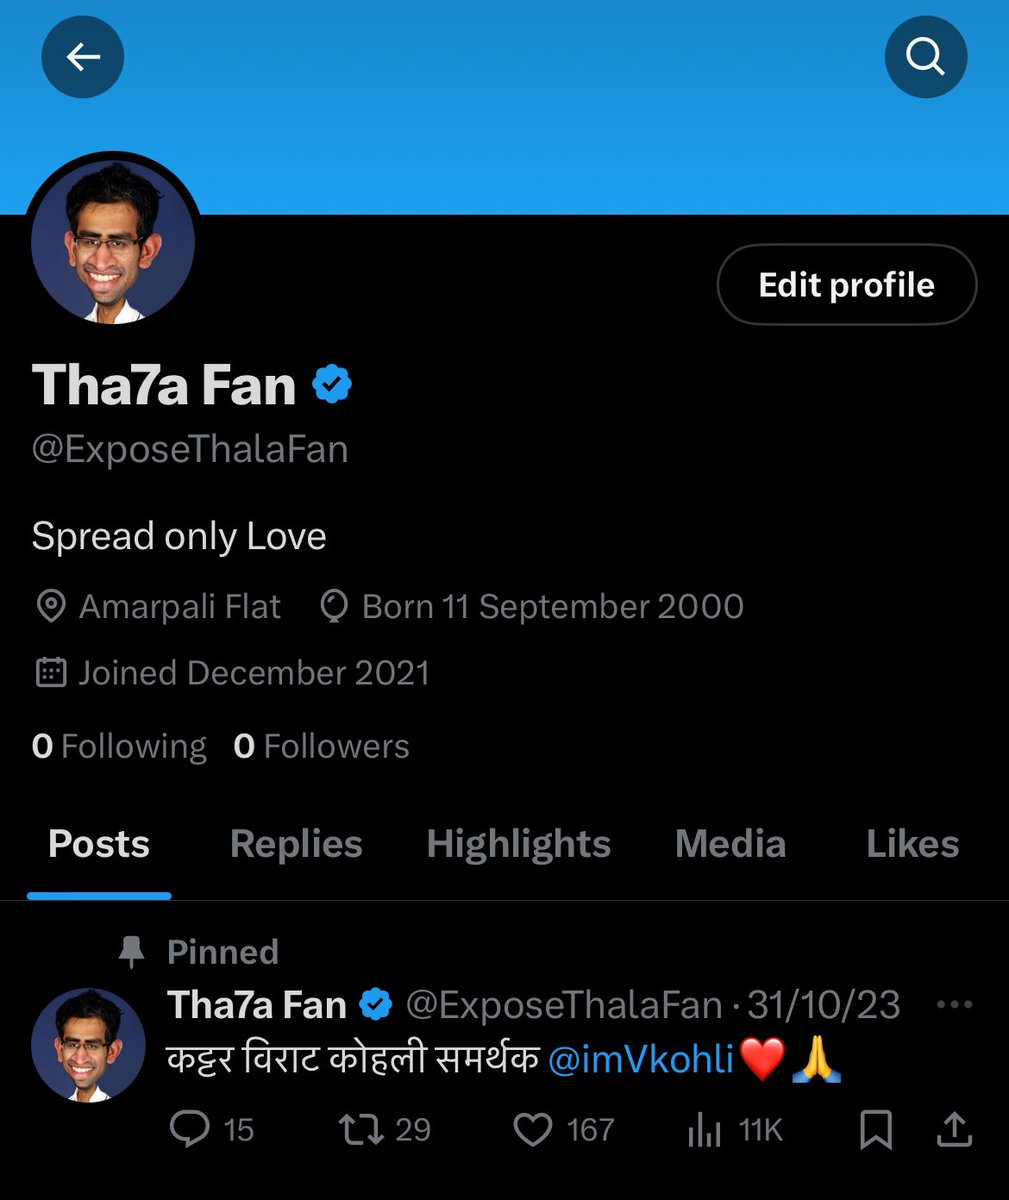 was @/ExposeThalaFan 💔 RT to find mutuals 🫀.